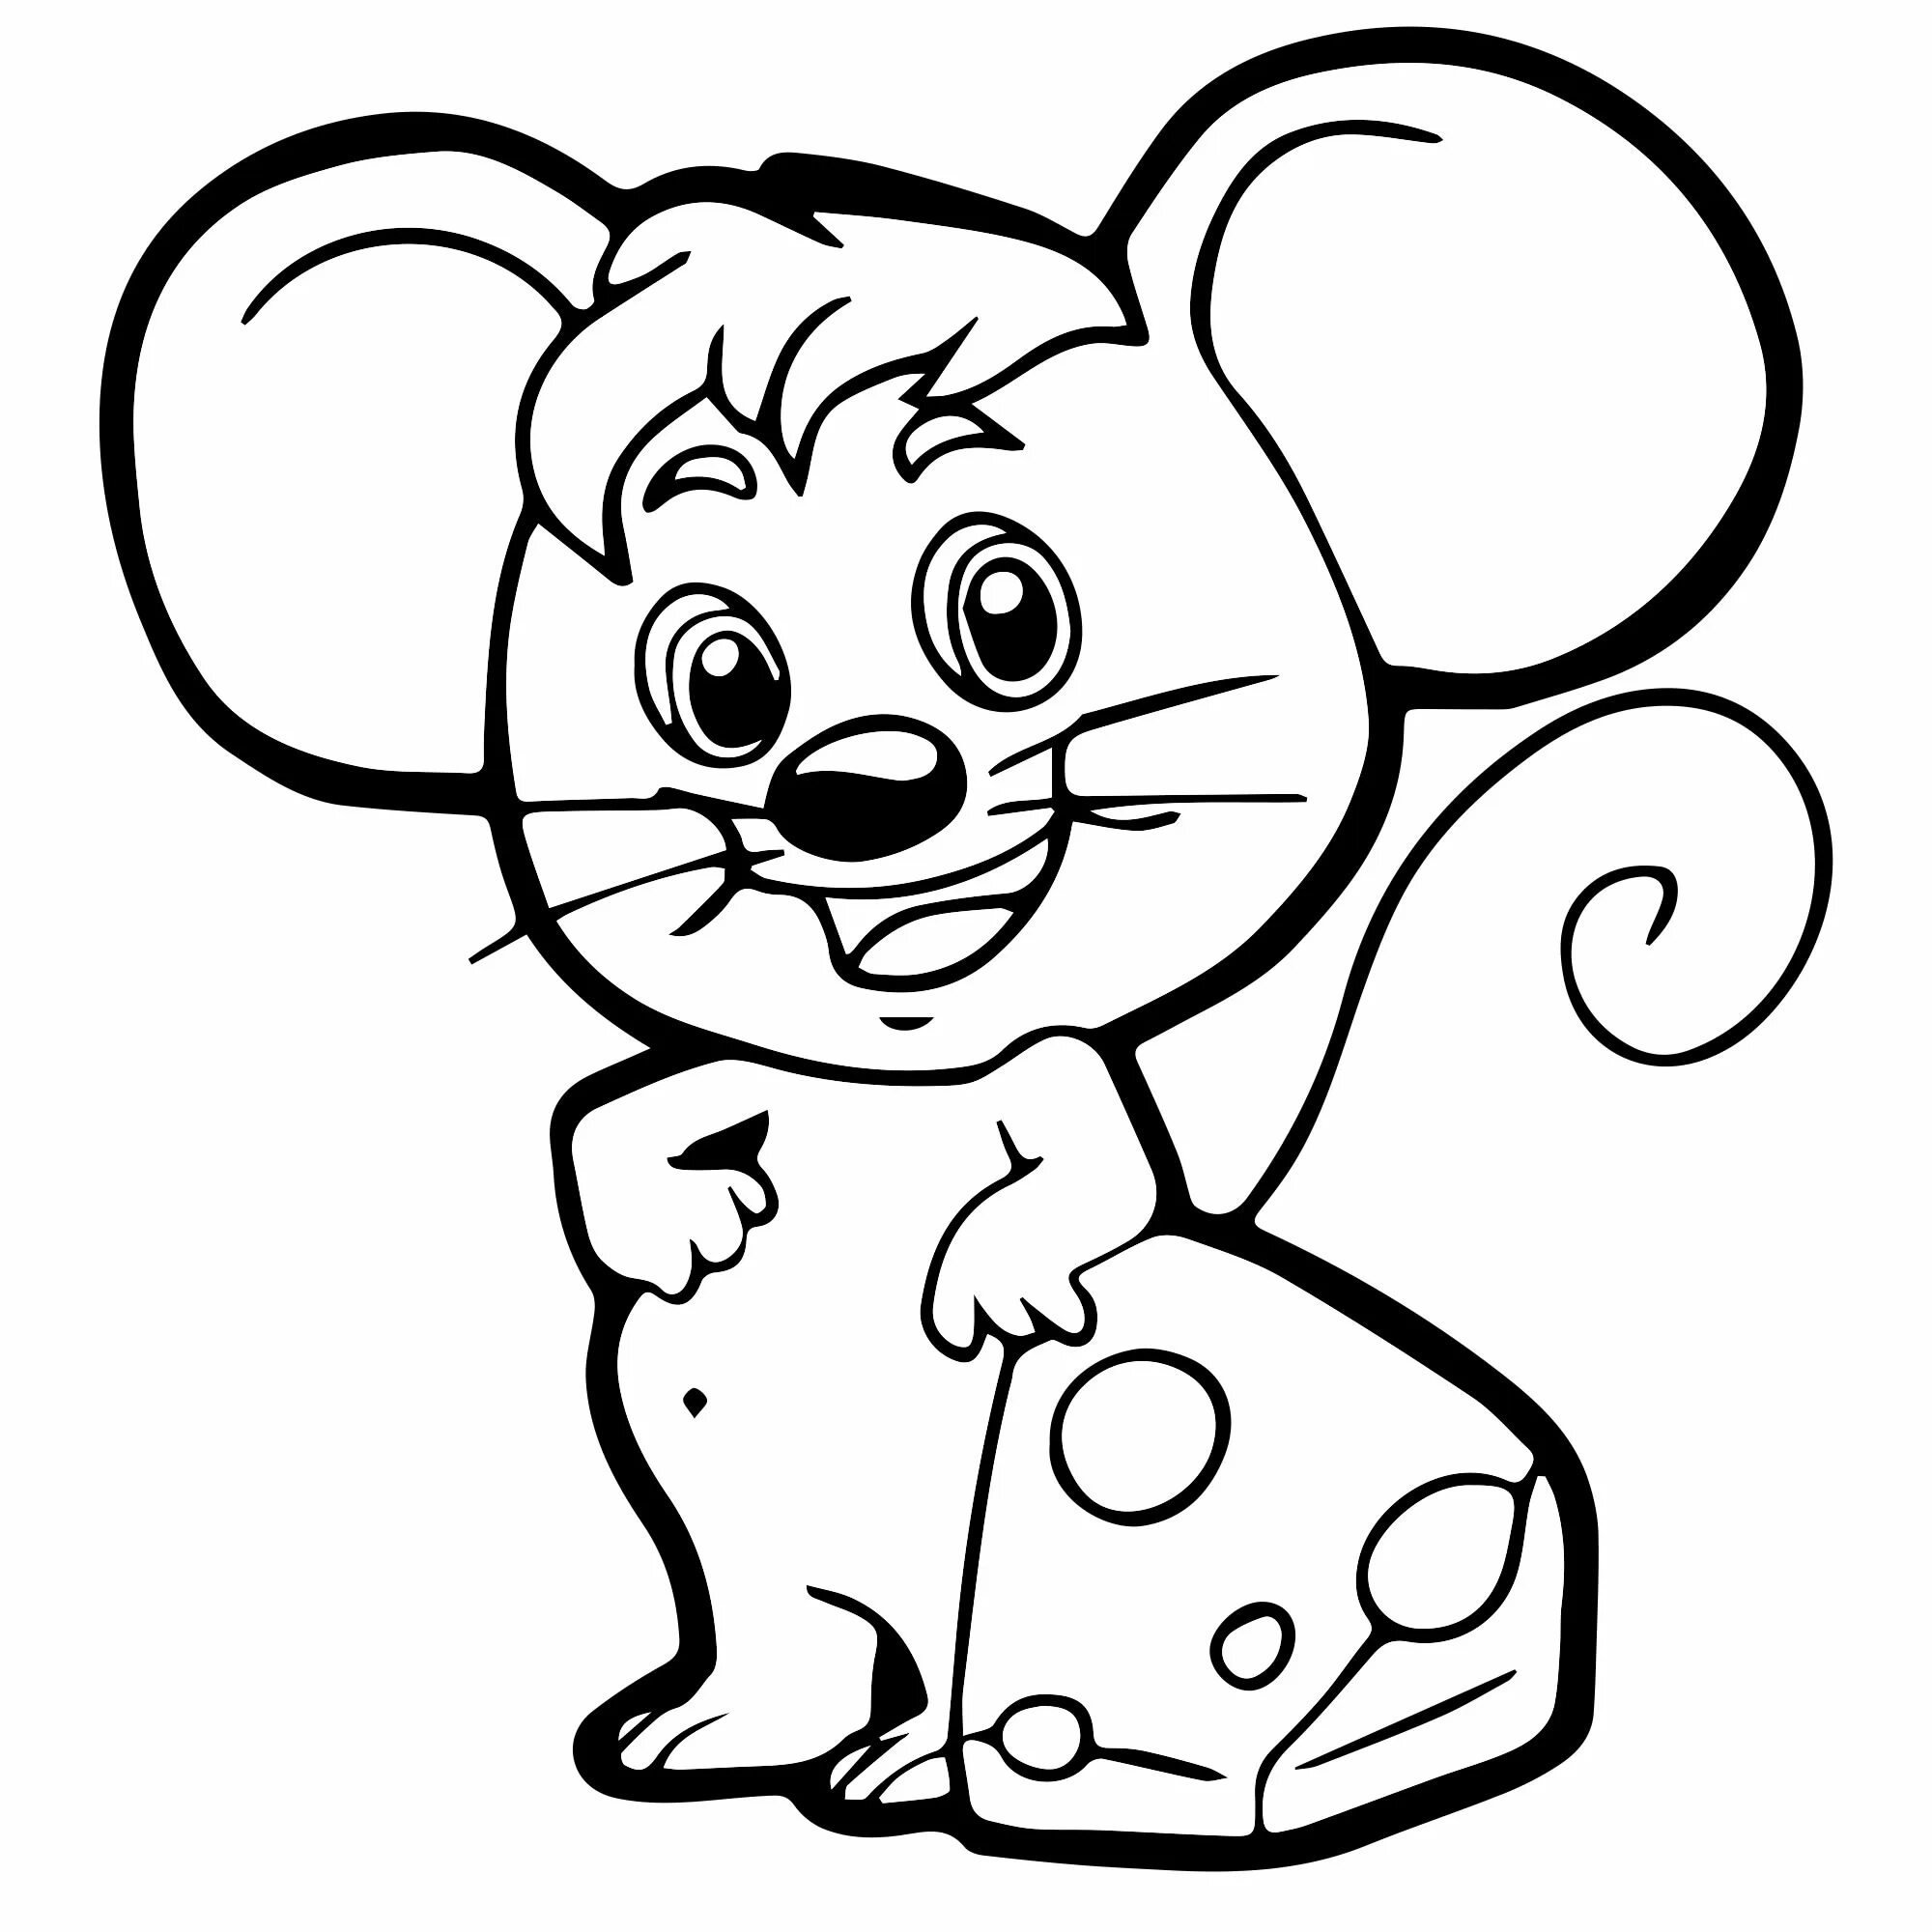 Merry mouse coloring book